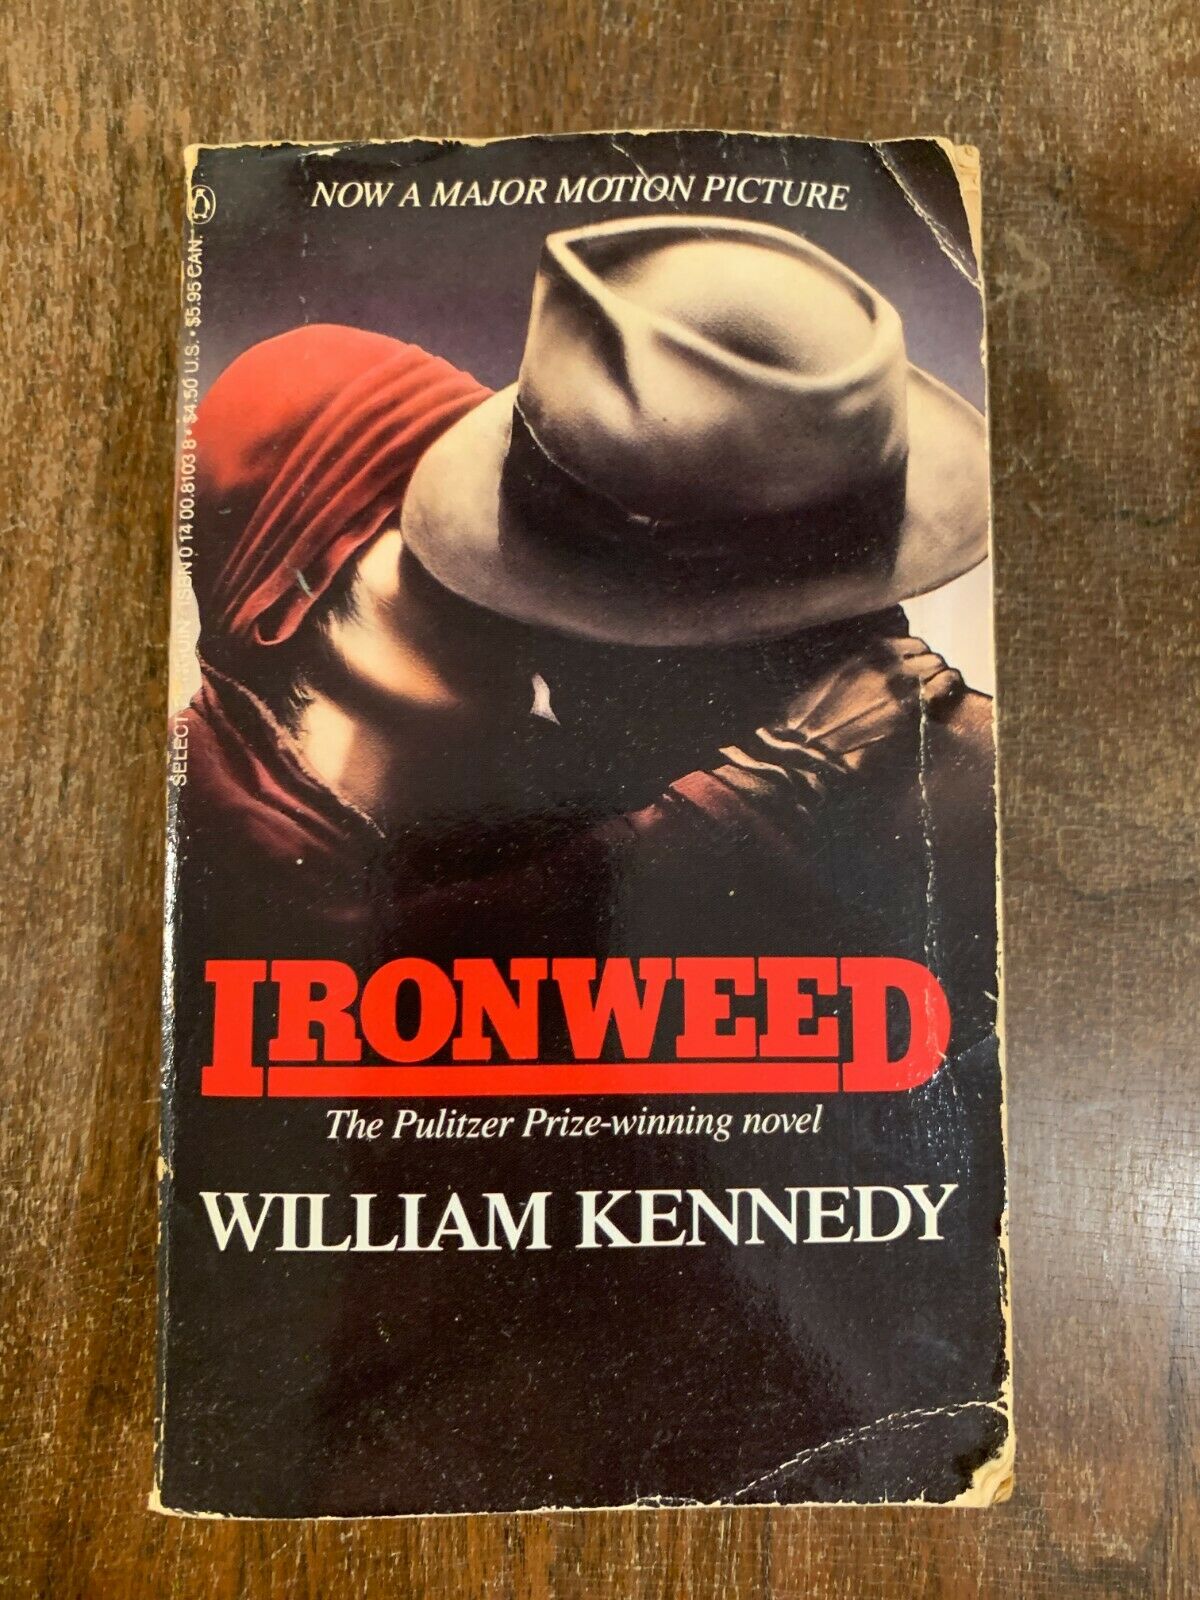 Ironweed (movie tie-in) by William Kennedy (1983) PB (4B)